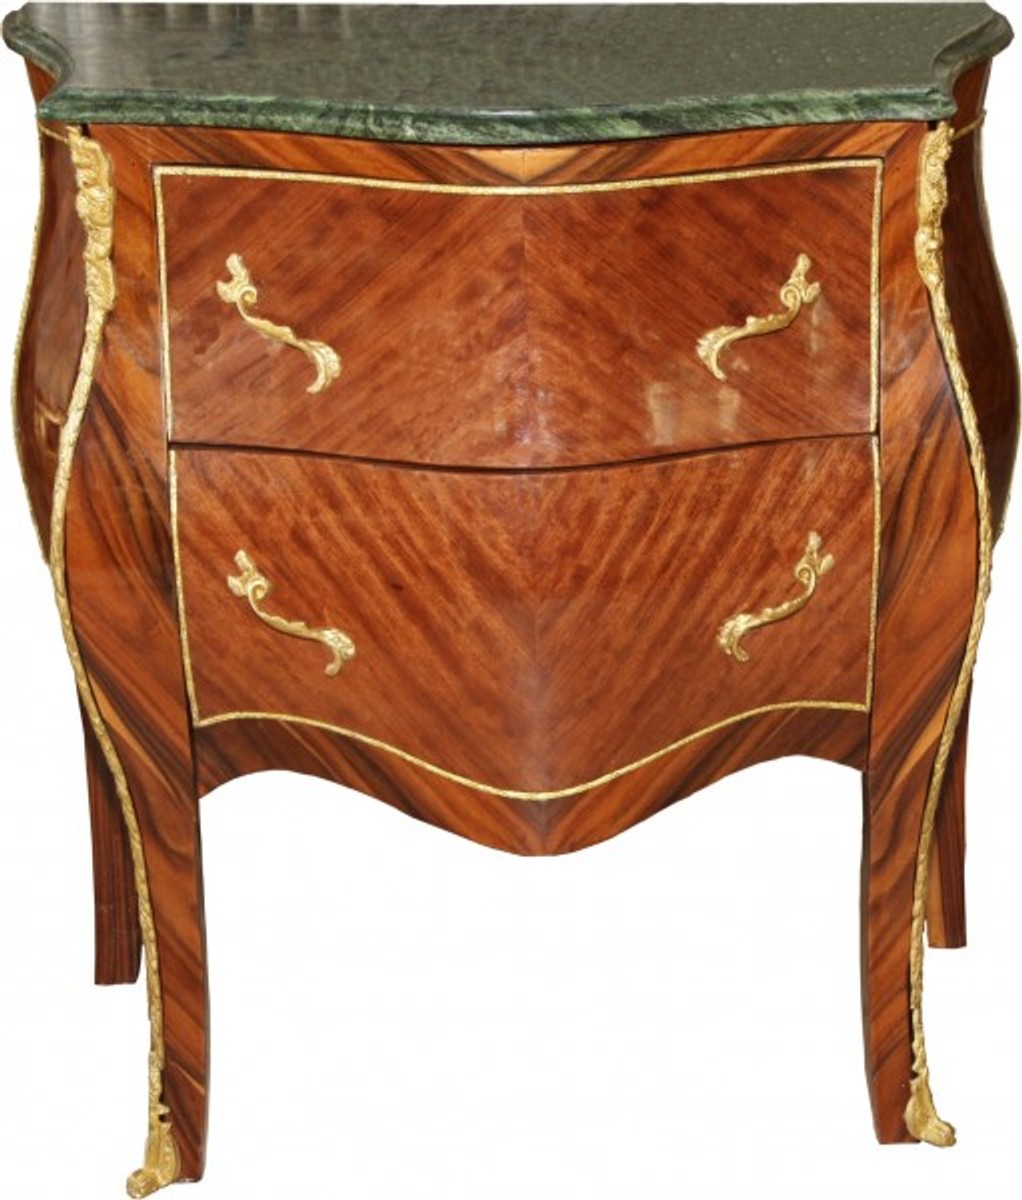 Casa Padrino Baroque Commode Brown With Marble Top 2 Drawers